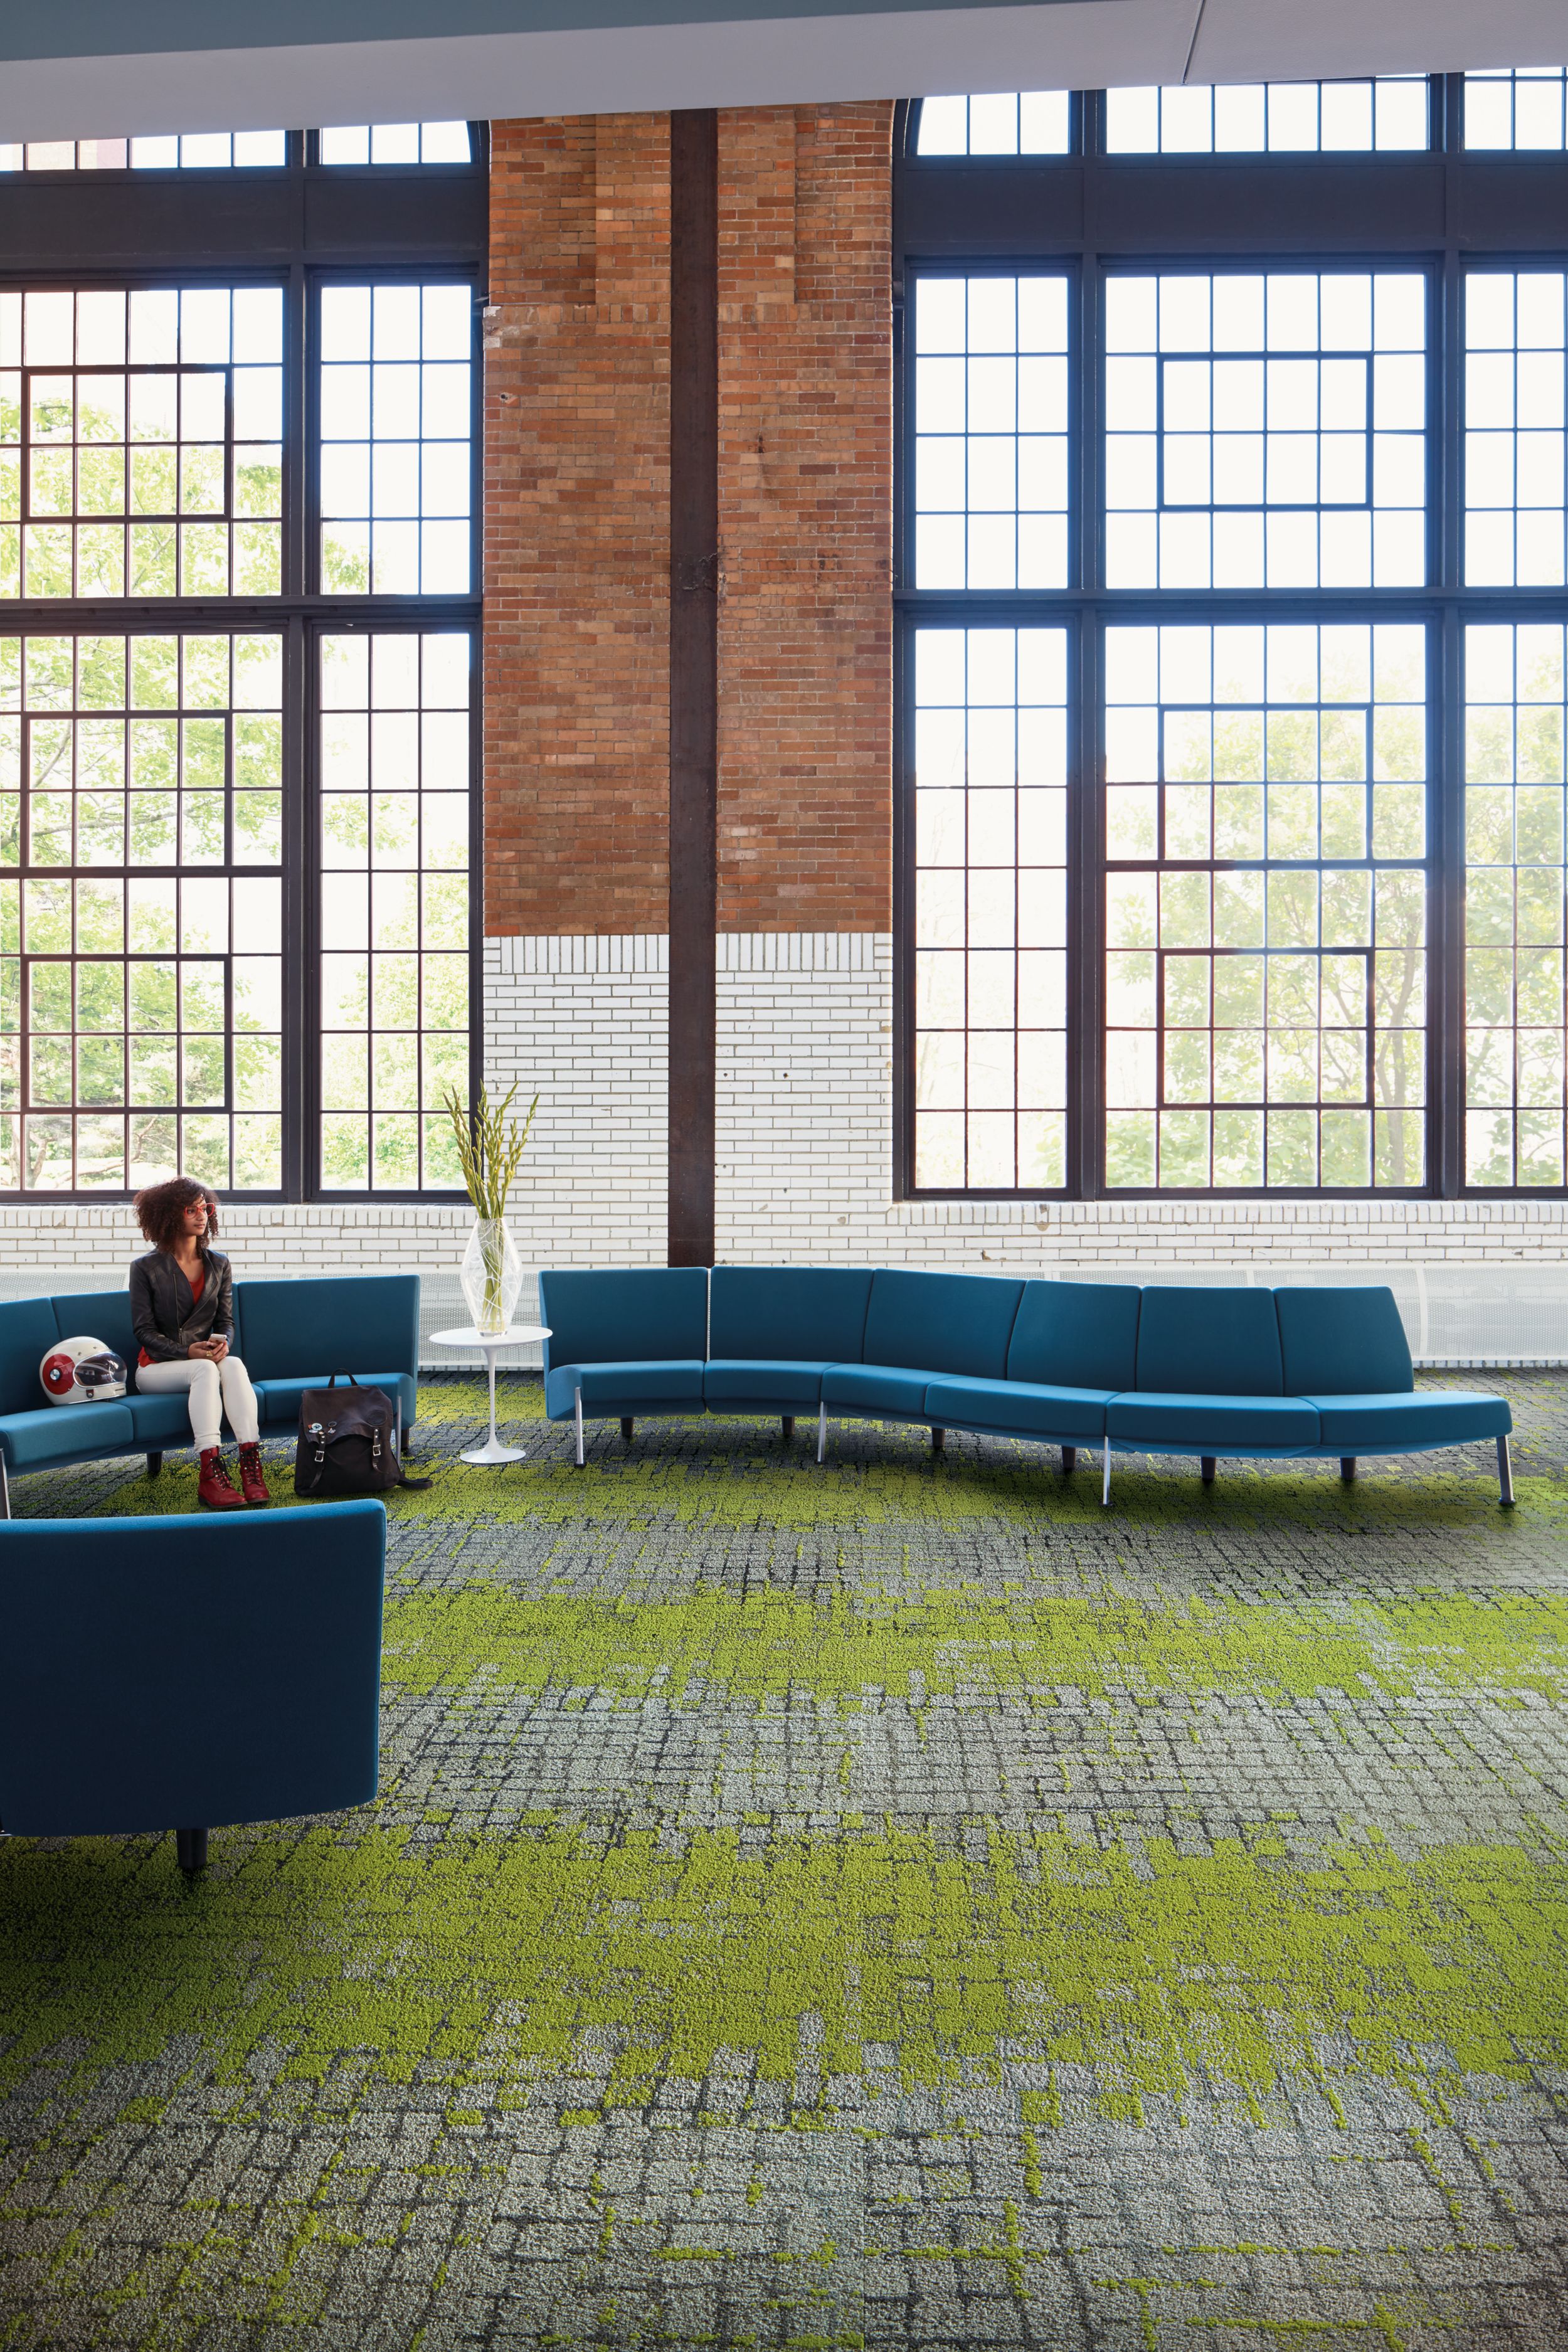 Interface Moss and Moss in Stone carpet tile in seating area with blue couches and women seated Bildnummer 1